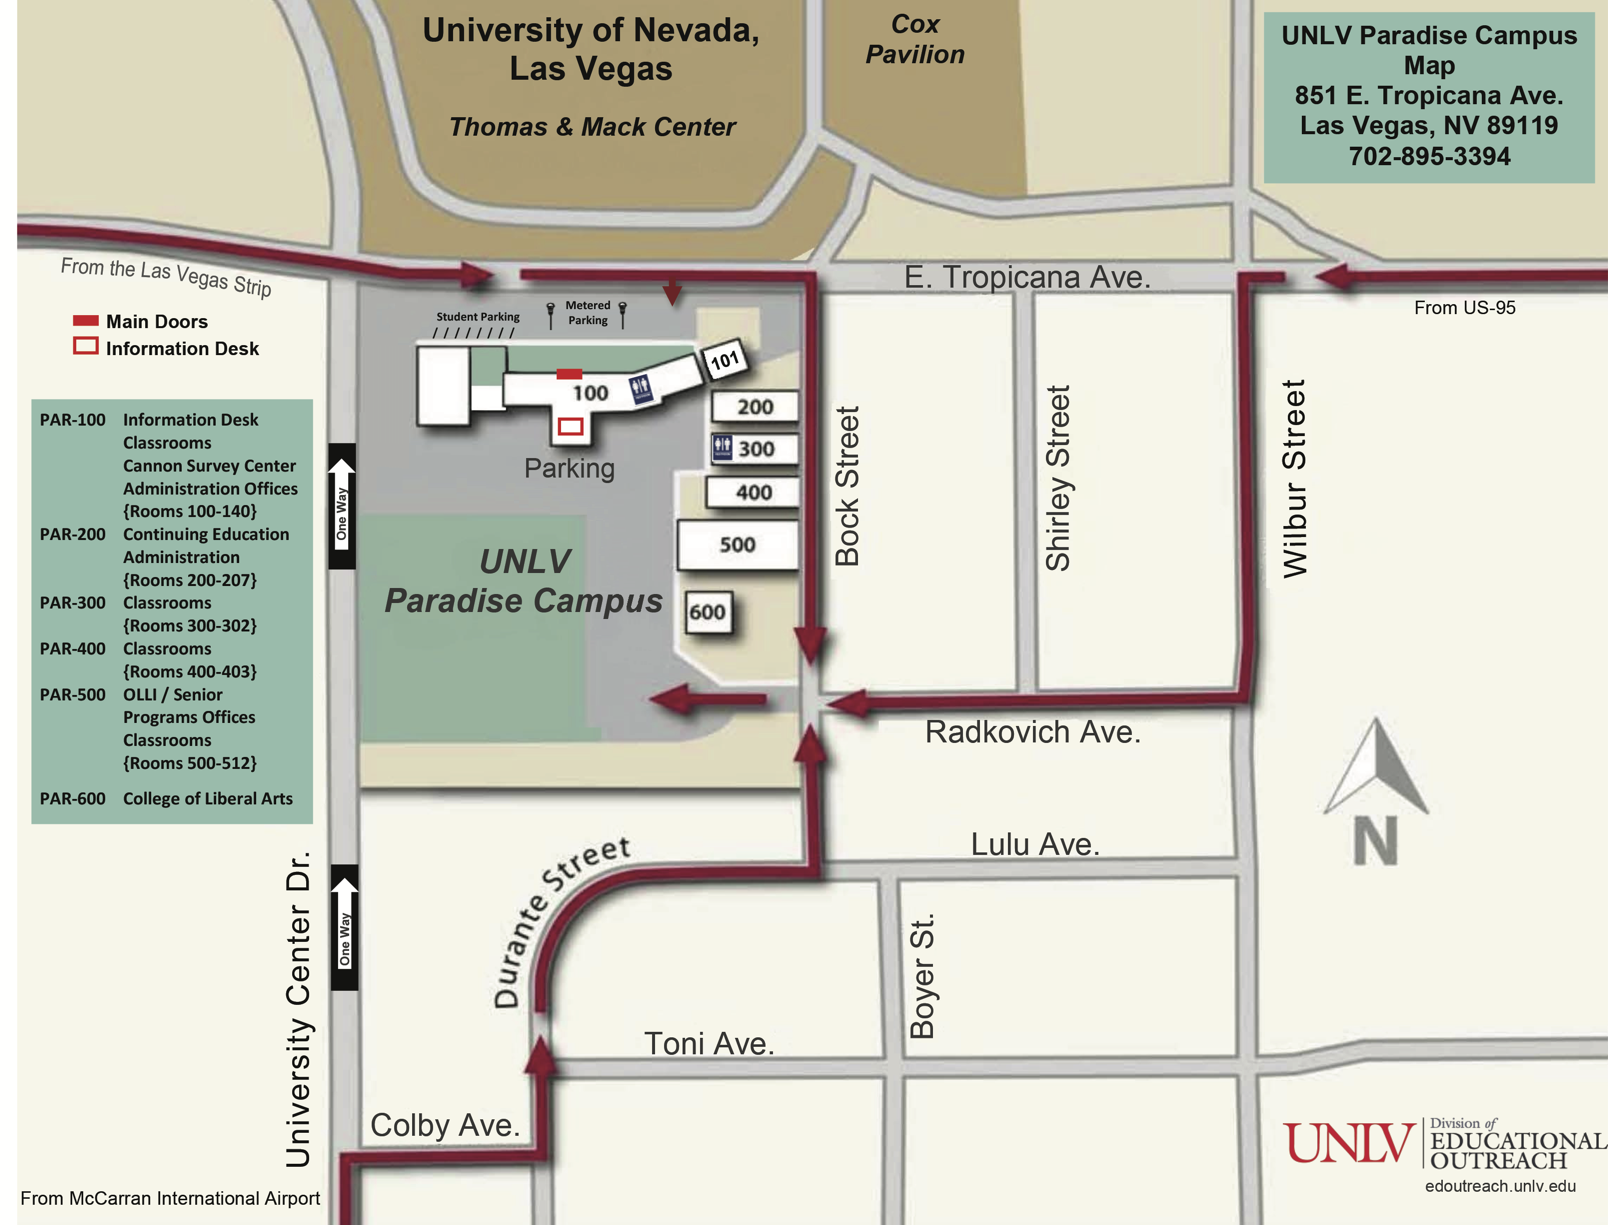 Contact UNLV Continuing Education